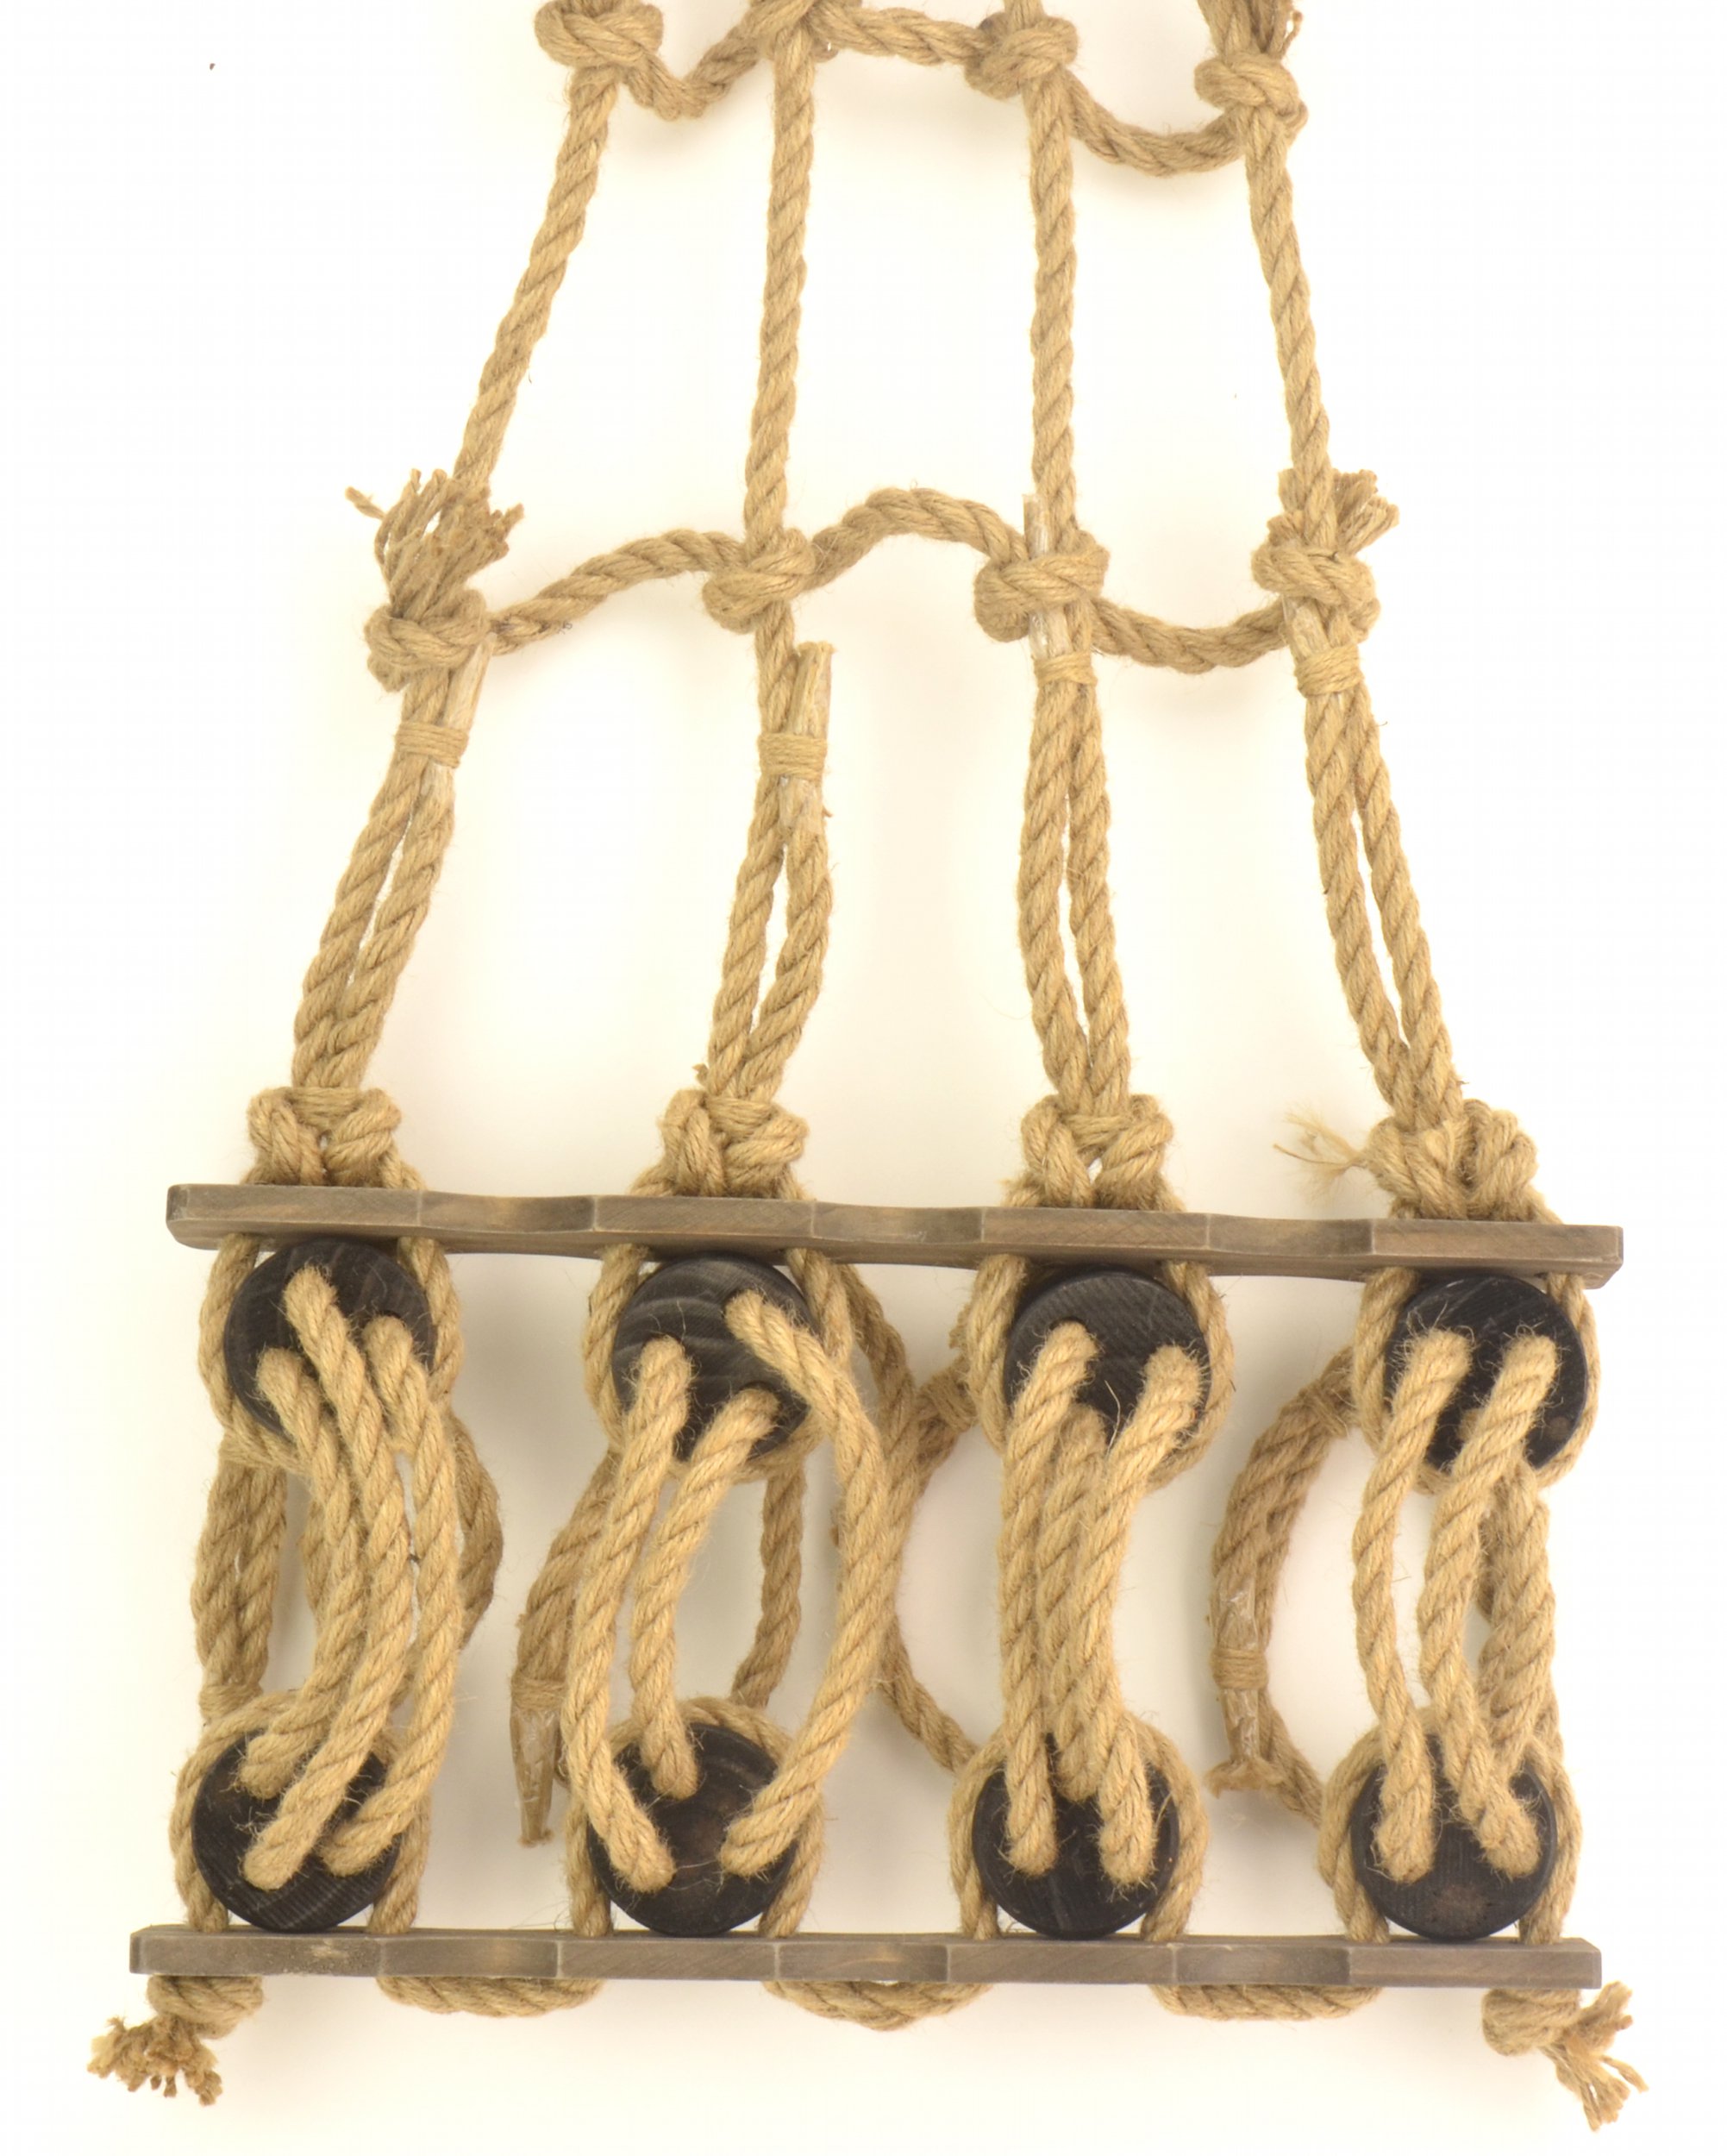 Rigging Rope Nautical Decoration - 42 3/4 Tall